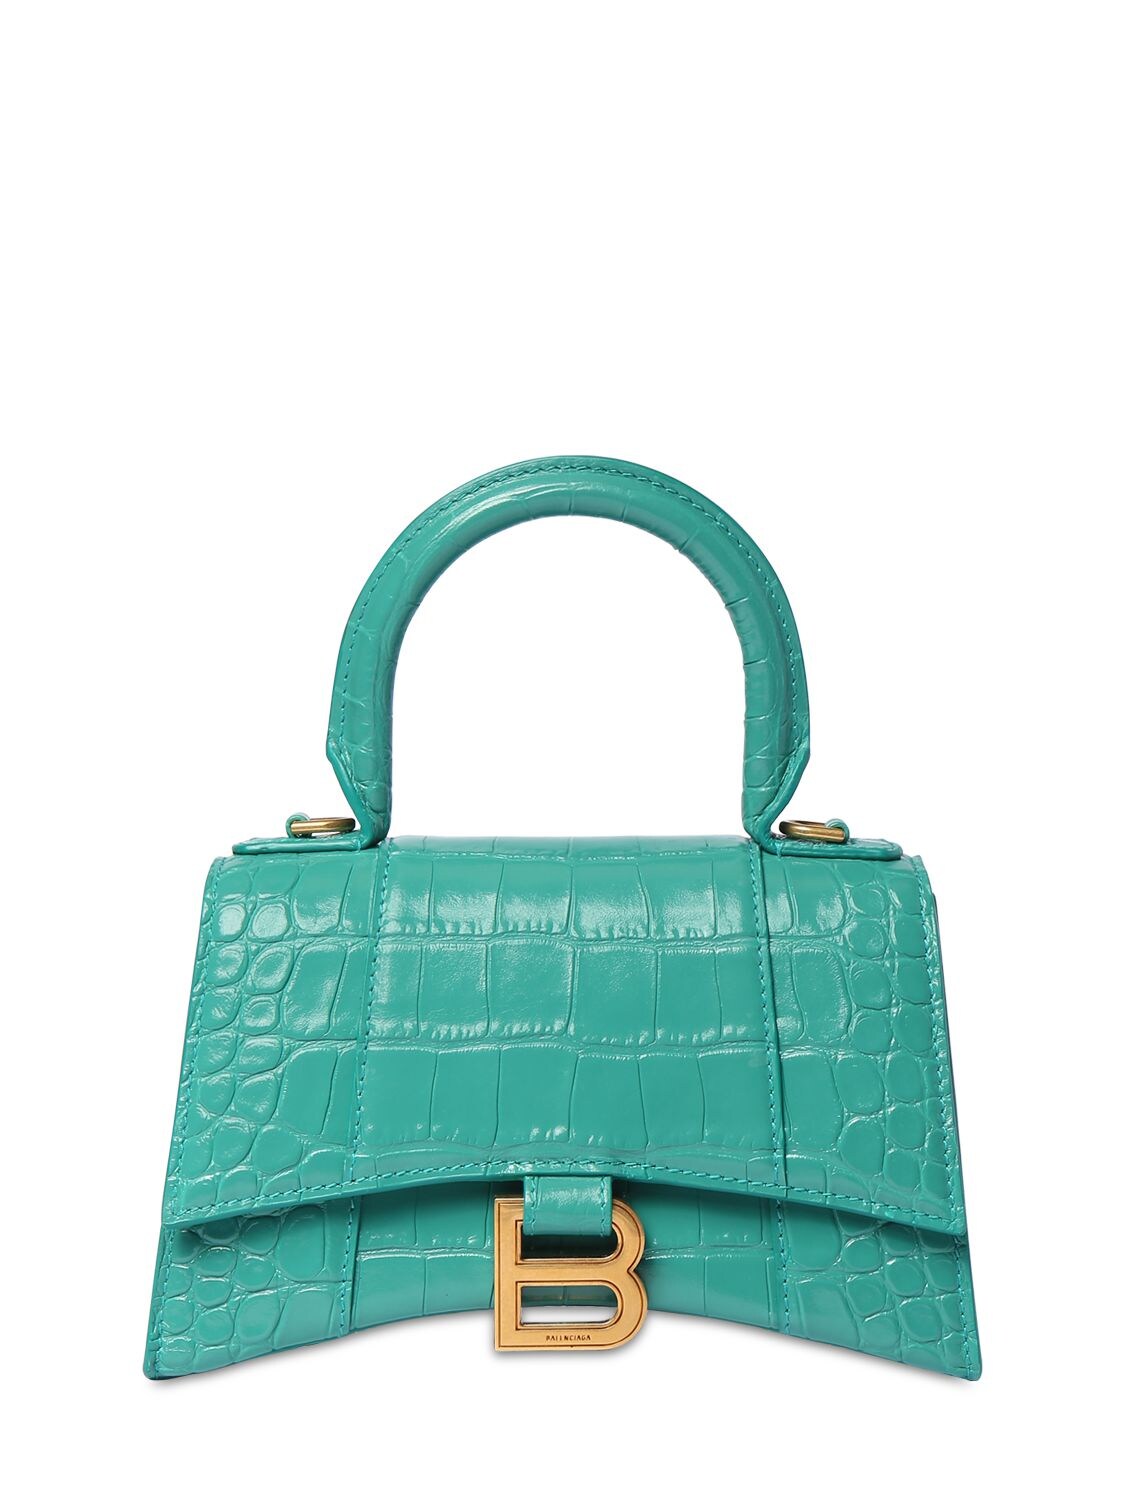 Balenciaga Xs Hourglass Croc Embossed Leather Bag In Dark Turquoise